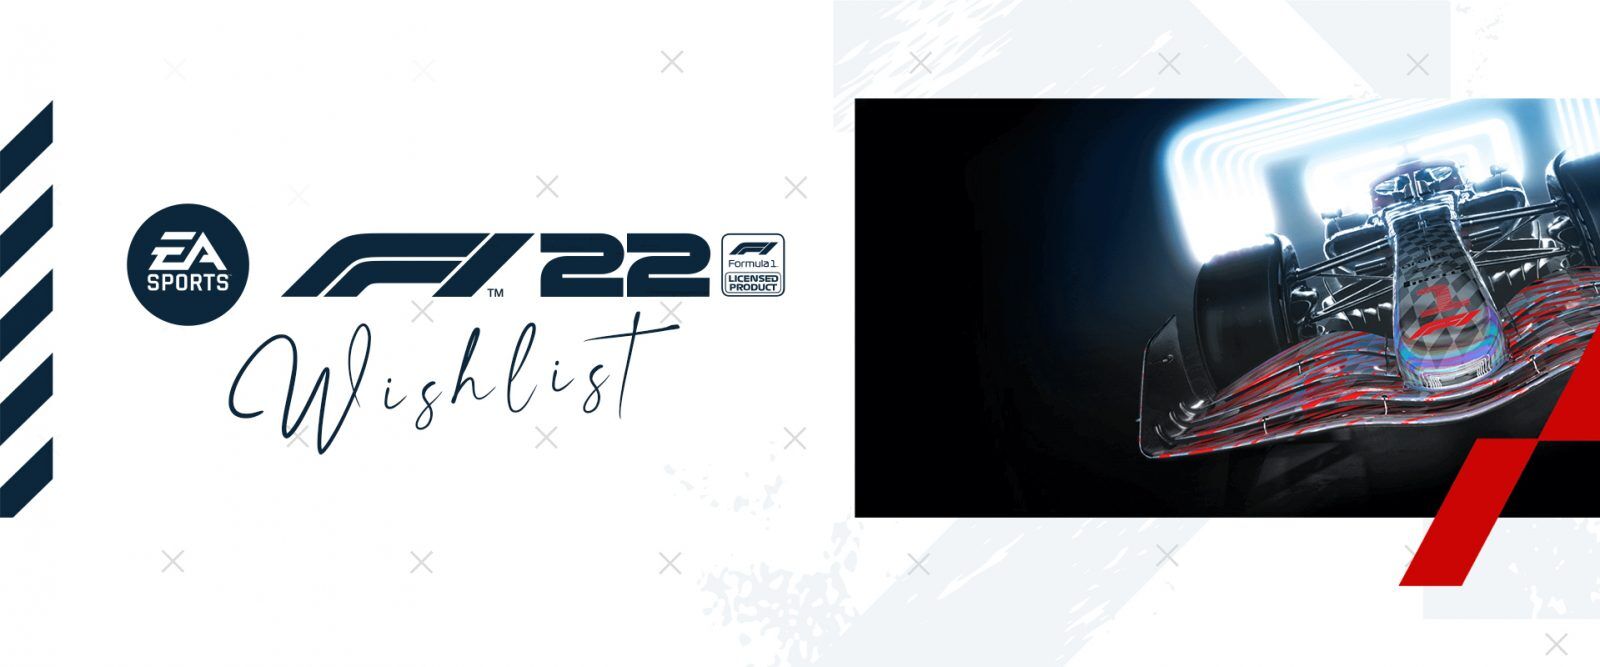 An image of an F1 22 generic car alongside text which reads "F1 22 Wishlist"